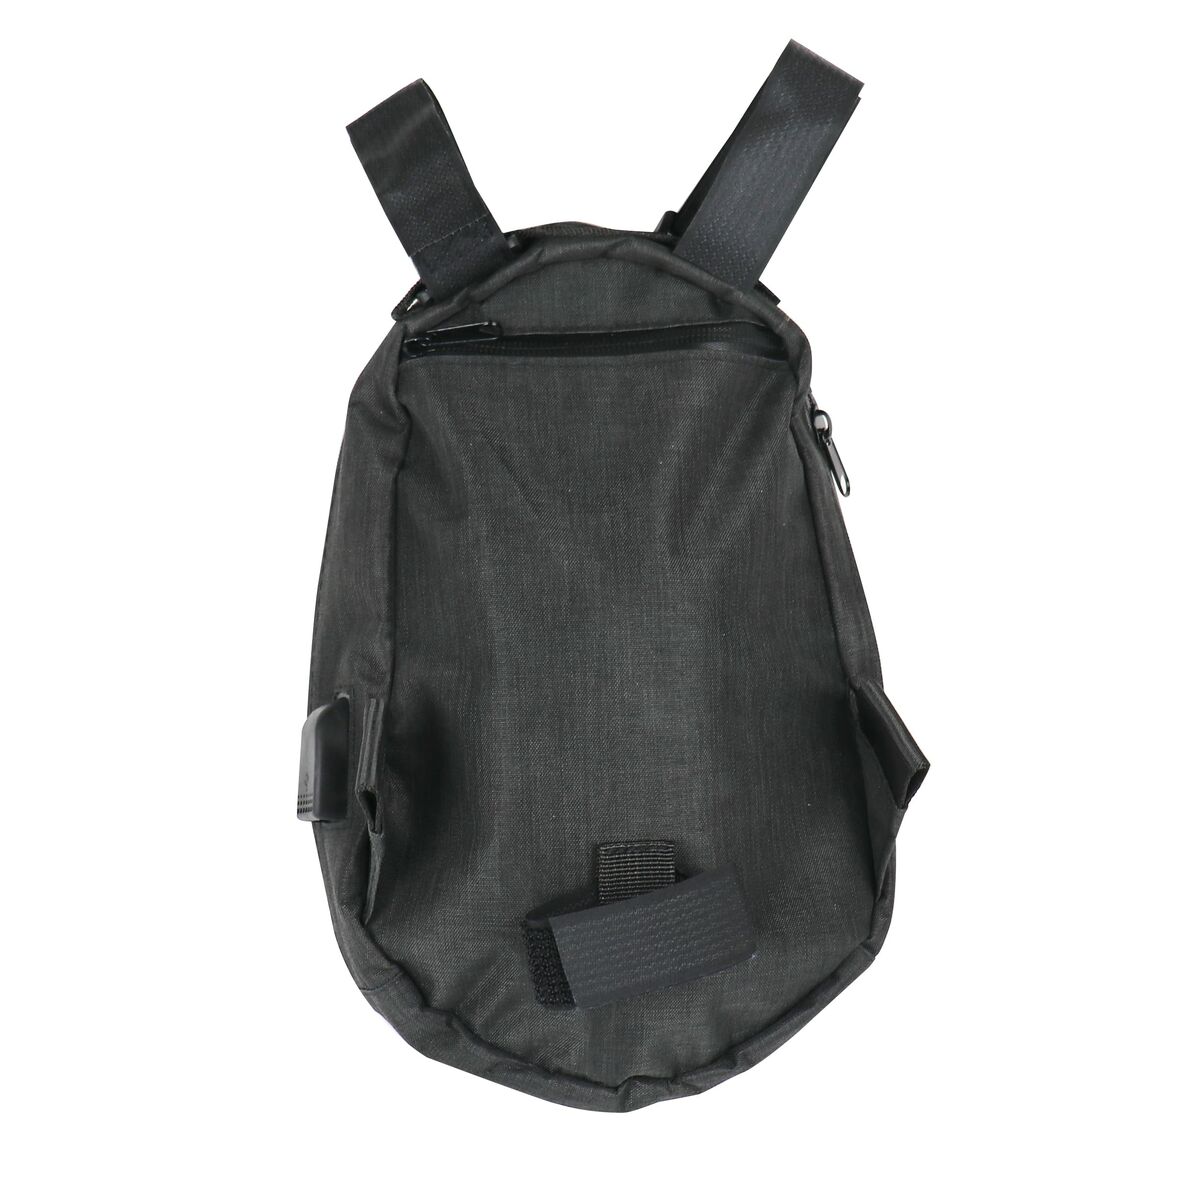 Rucksack Smartgyro SG27-343, Smartgyro, Sports and outdoors, Urban mobility, rucksack-smartgyro-sg27-343, Brand_Smartgyro, category-reference-2609, category-reference-2629, category-reference-2904, category-reference-t-19681, category-reference-t-19756, category-reference-t-19876, category-reference-t-21245, Condition_NEW, deportista / en forma, Price_20 - 50, RiotNook